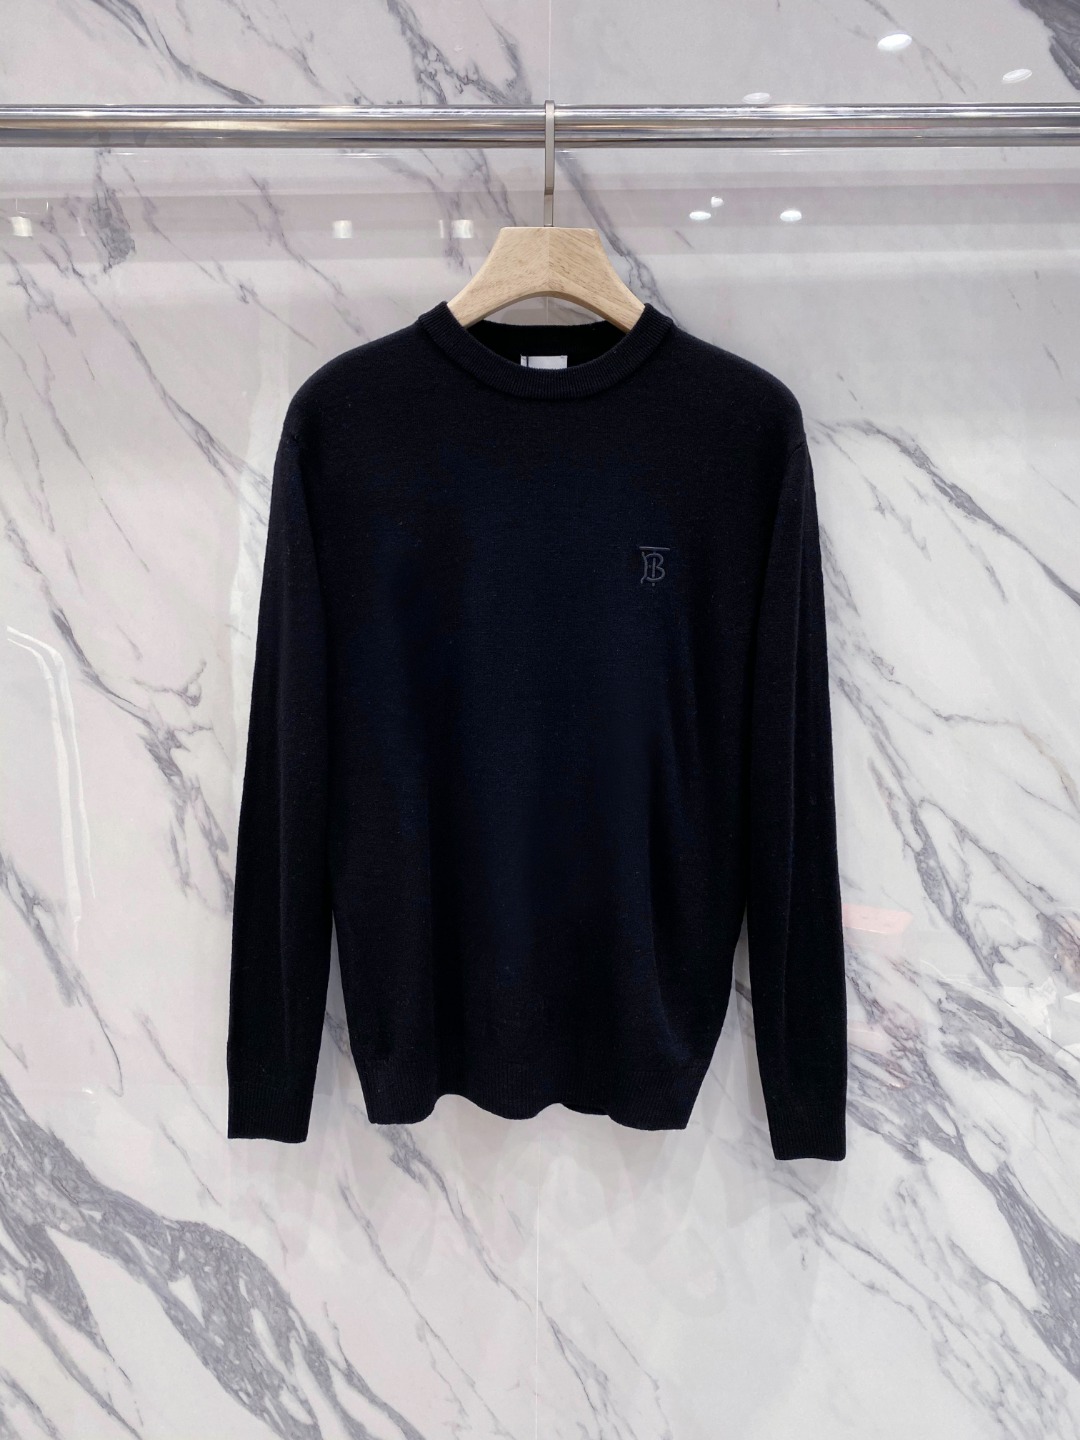 Burberry Clothing Sweatshirts Best Like
 Cashmere Spandex Wool Fall/Winter Collection